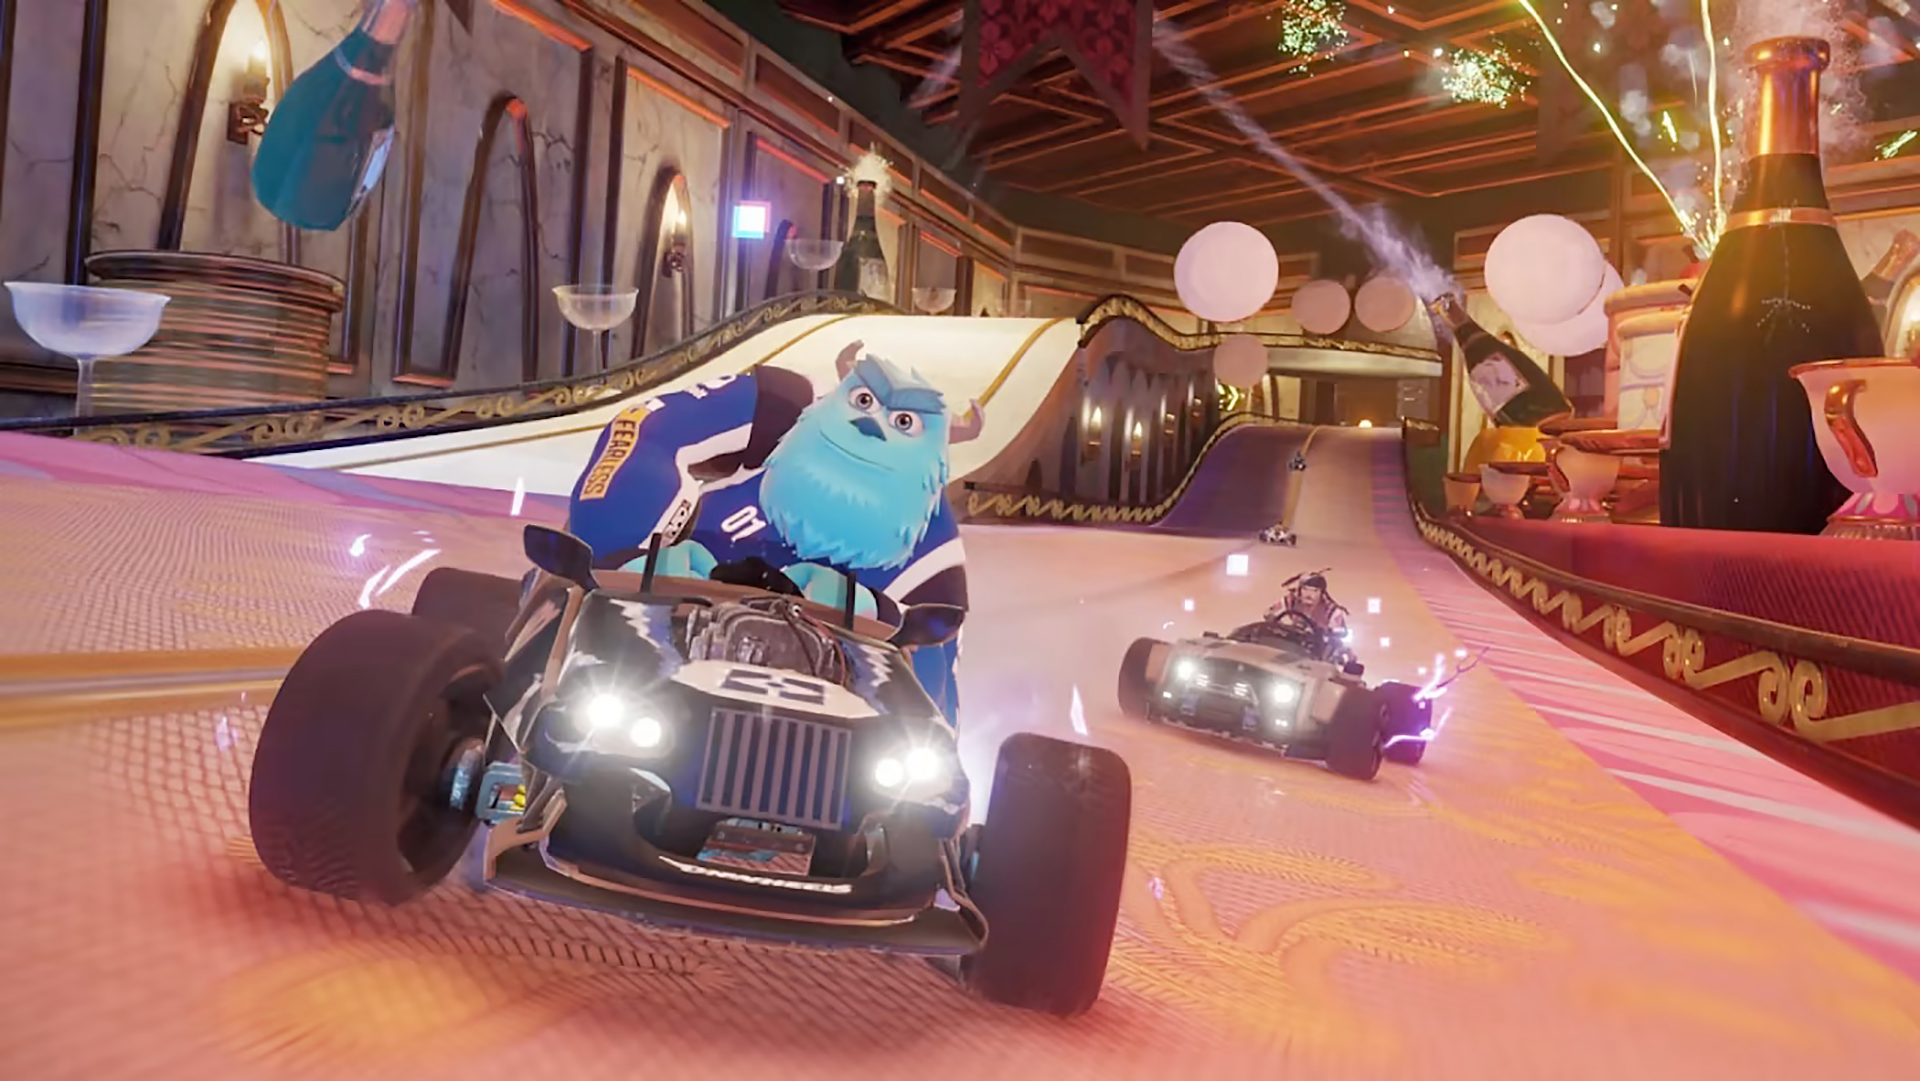 Disney Speedstorm's Season 2 - New Racers, Tracks, and Game Modes Revealed for High-Octane Fun! 23